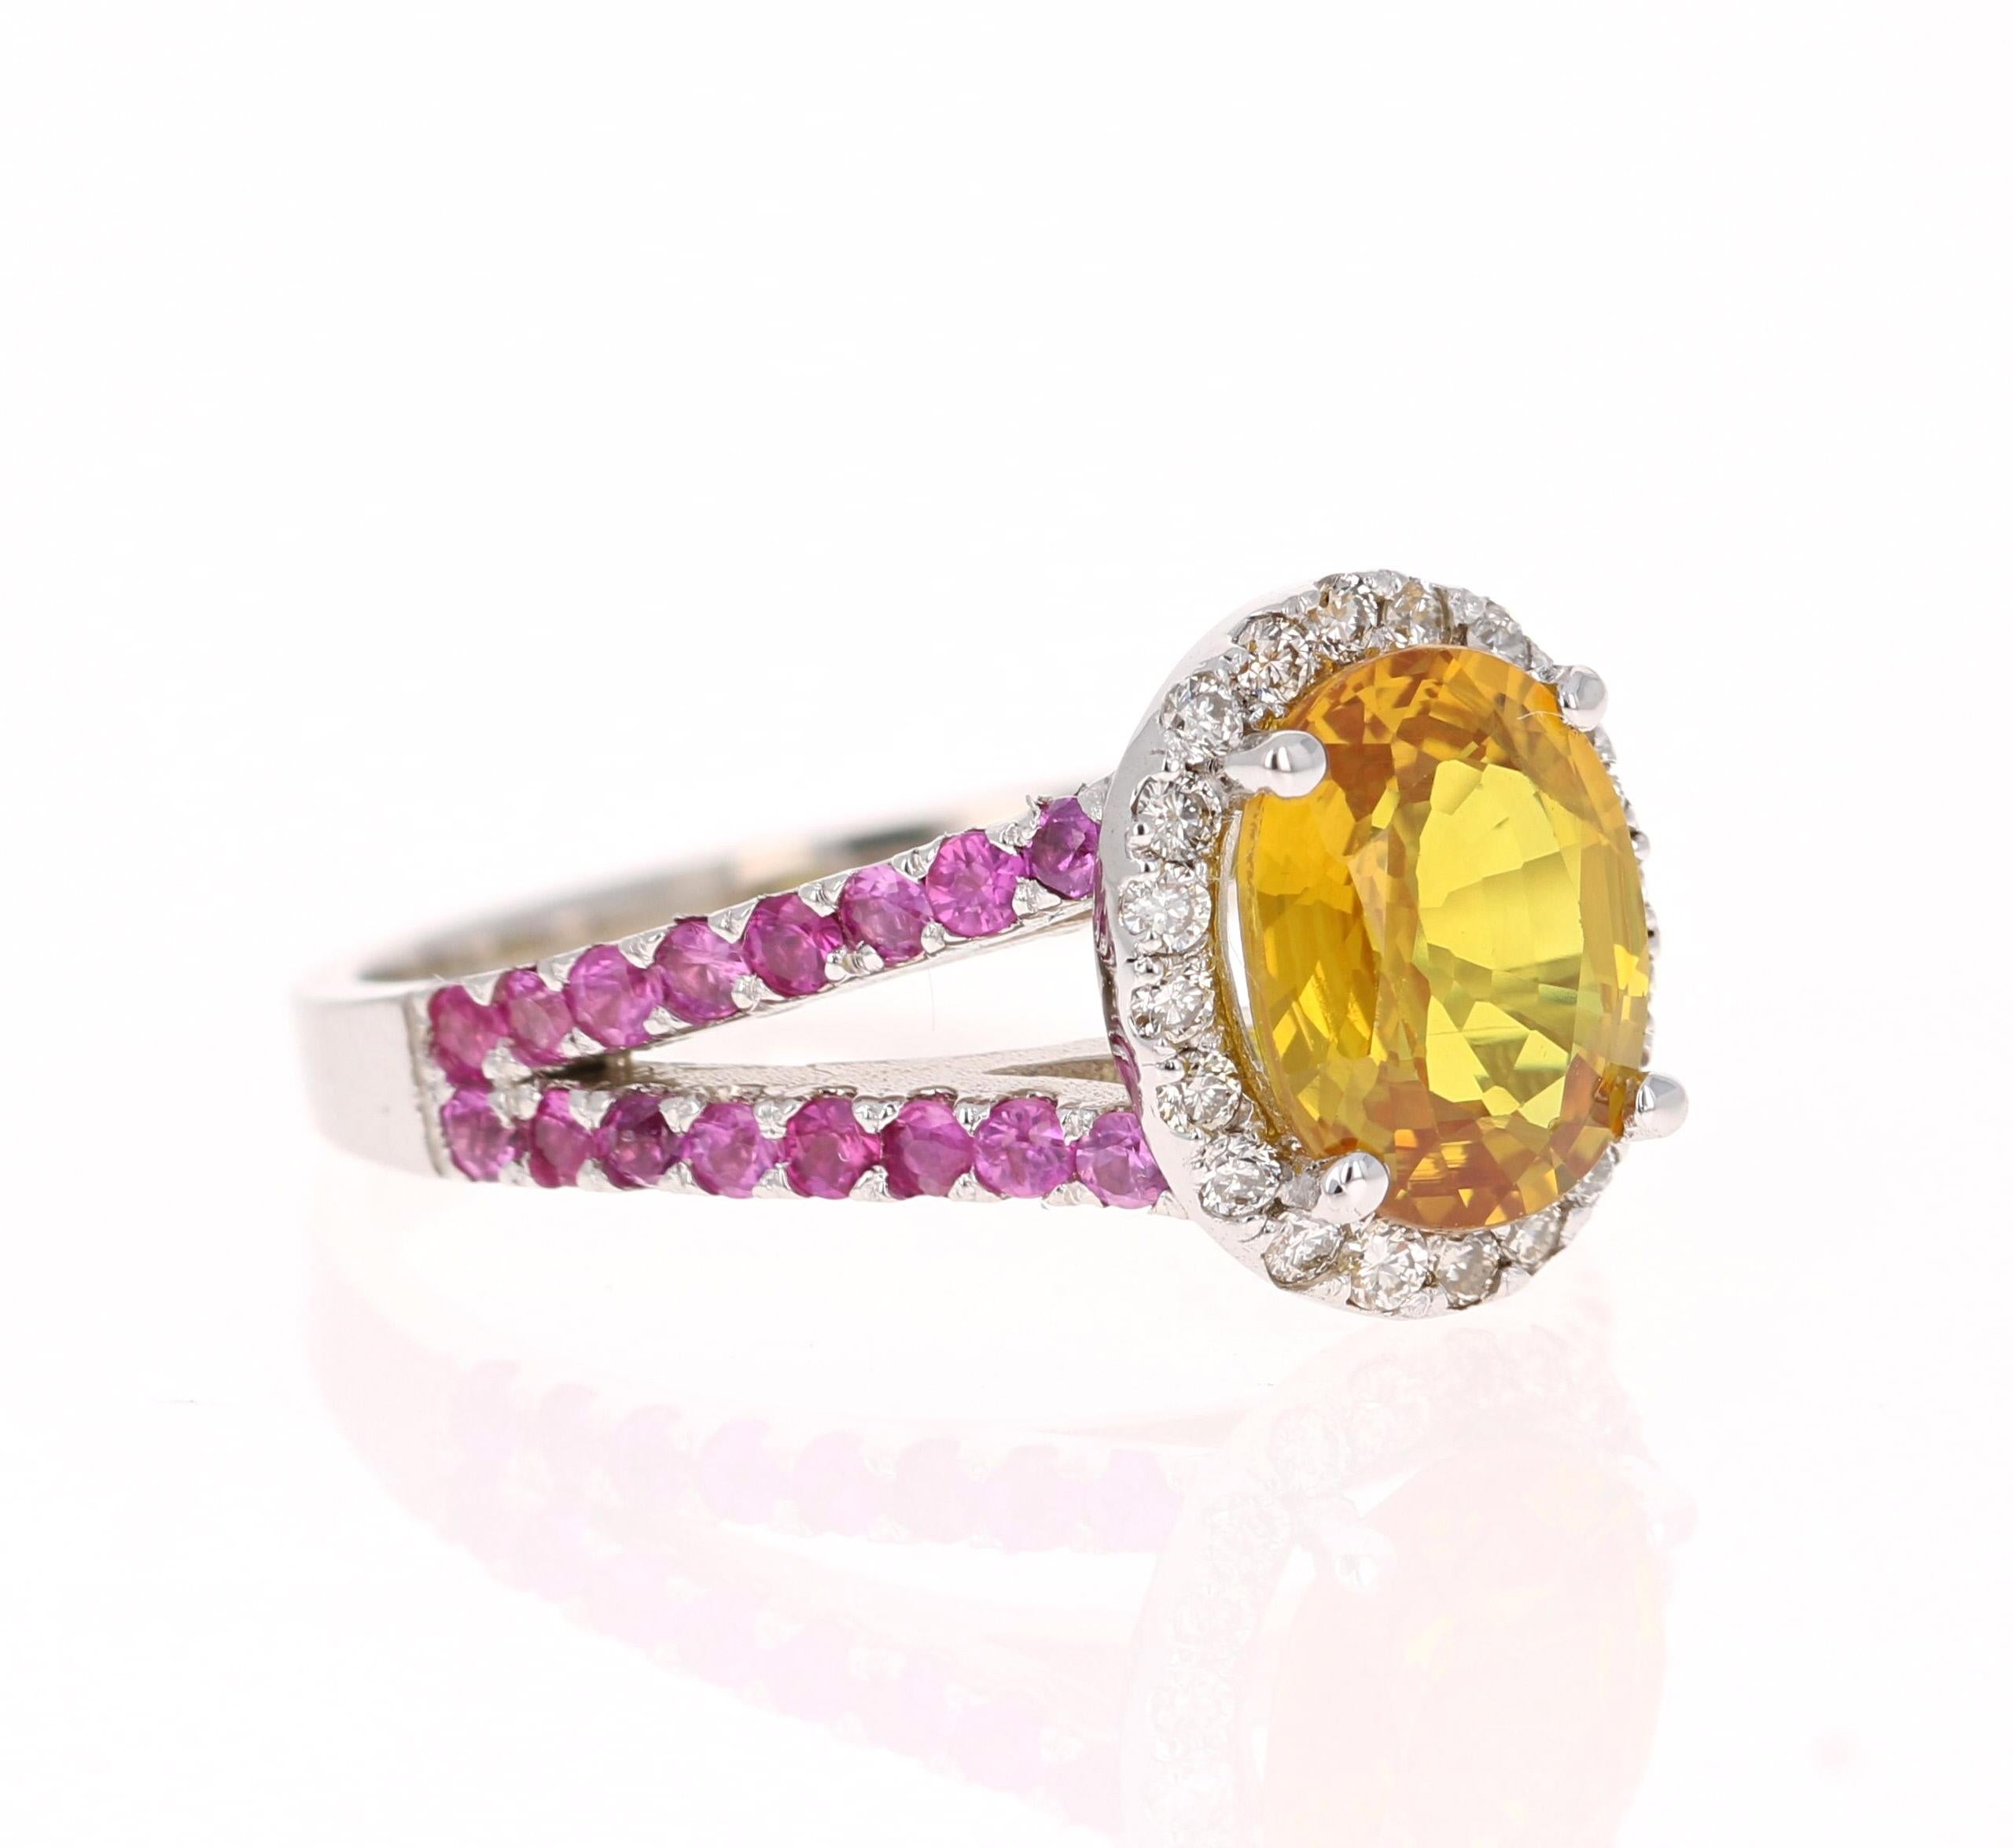 This beautiful ring has an Oval Cut Yellow Sapphire that weighs 2.17 Carats. It is surrounded by 22 Round Cut Diamonds that weigh 0.24 Carats. (Clarity: VS, Color: H) and it has Pink Sapphires on its shank that weigh 0.65 Carats. The total carat